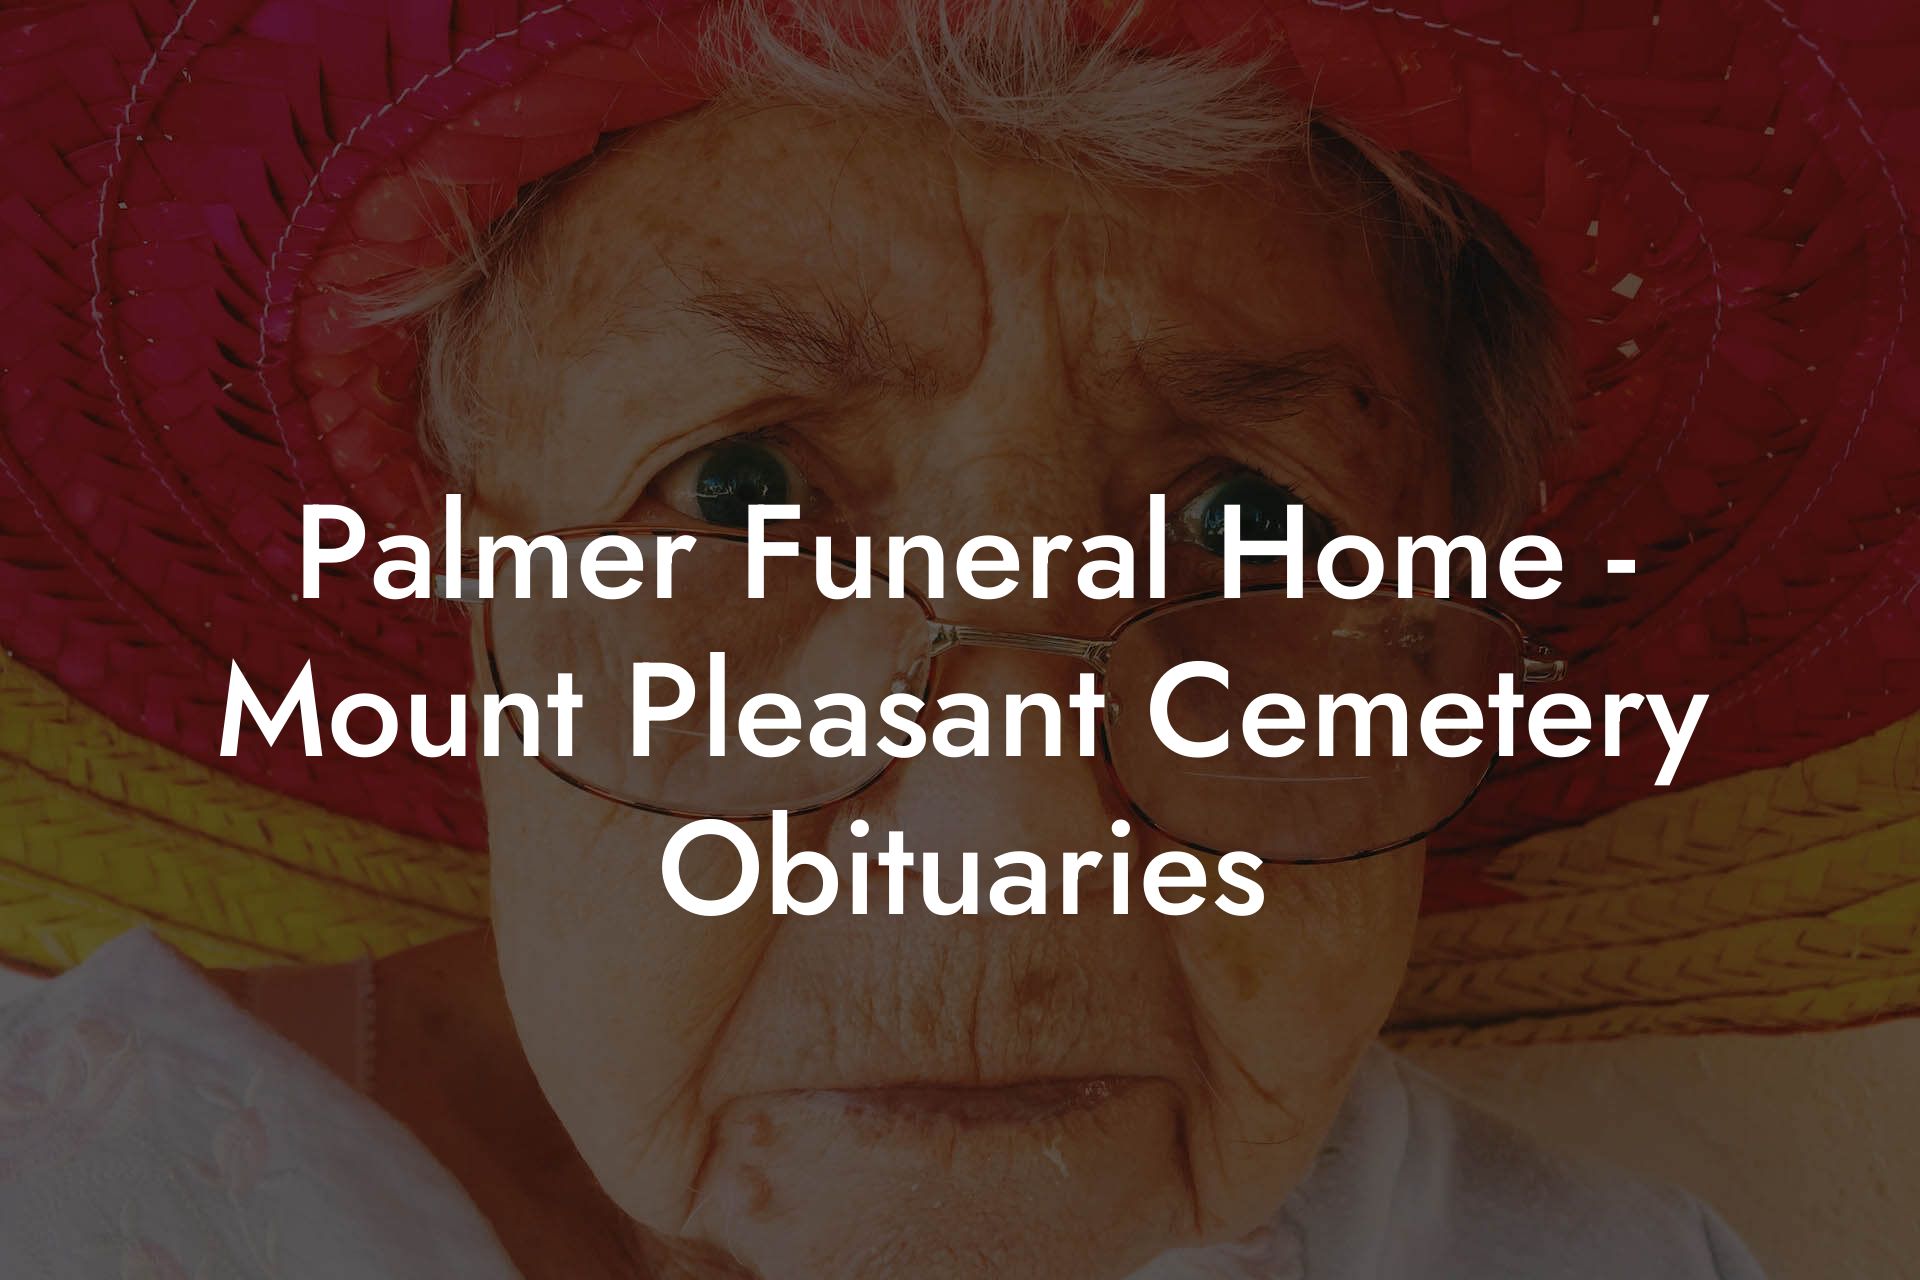 Palmer Funeral Home - Mount Pleasant Cemetery Obituaries